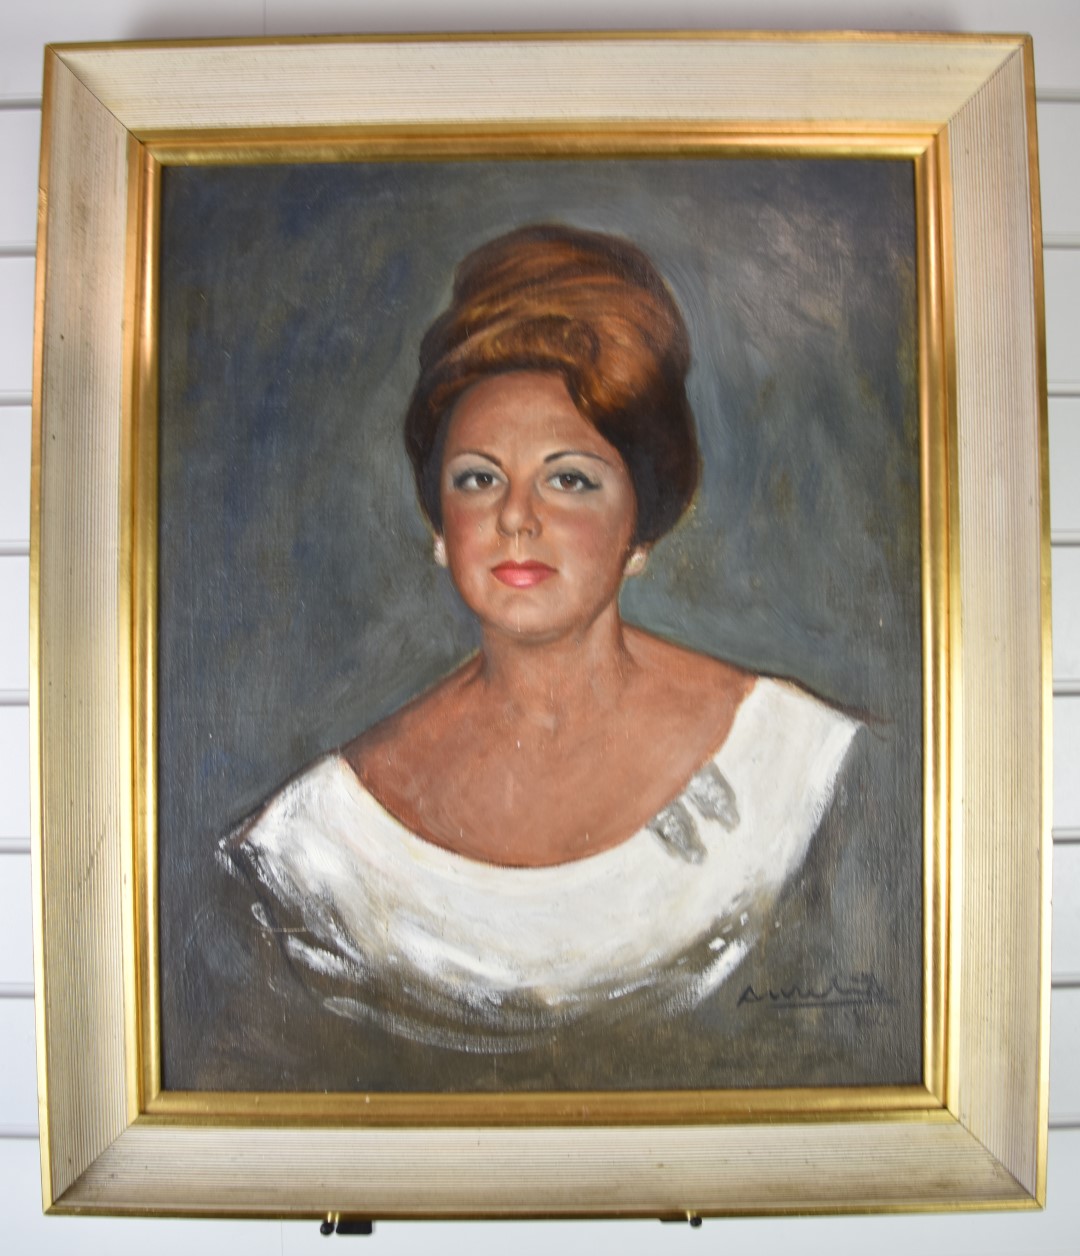 Oil on canvas portrait of a lady, indistinctly signed and dated 1966 lower right, 60 x 49cm, in part - Image 2 of 4